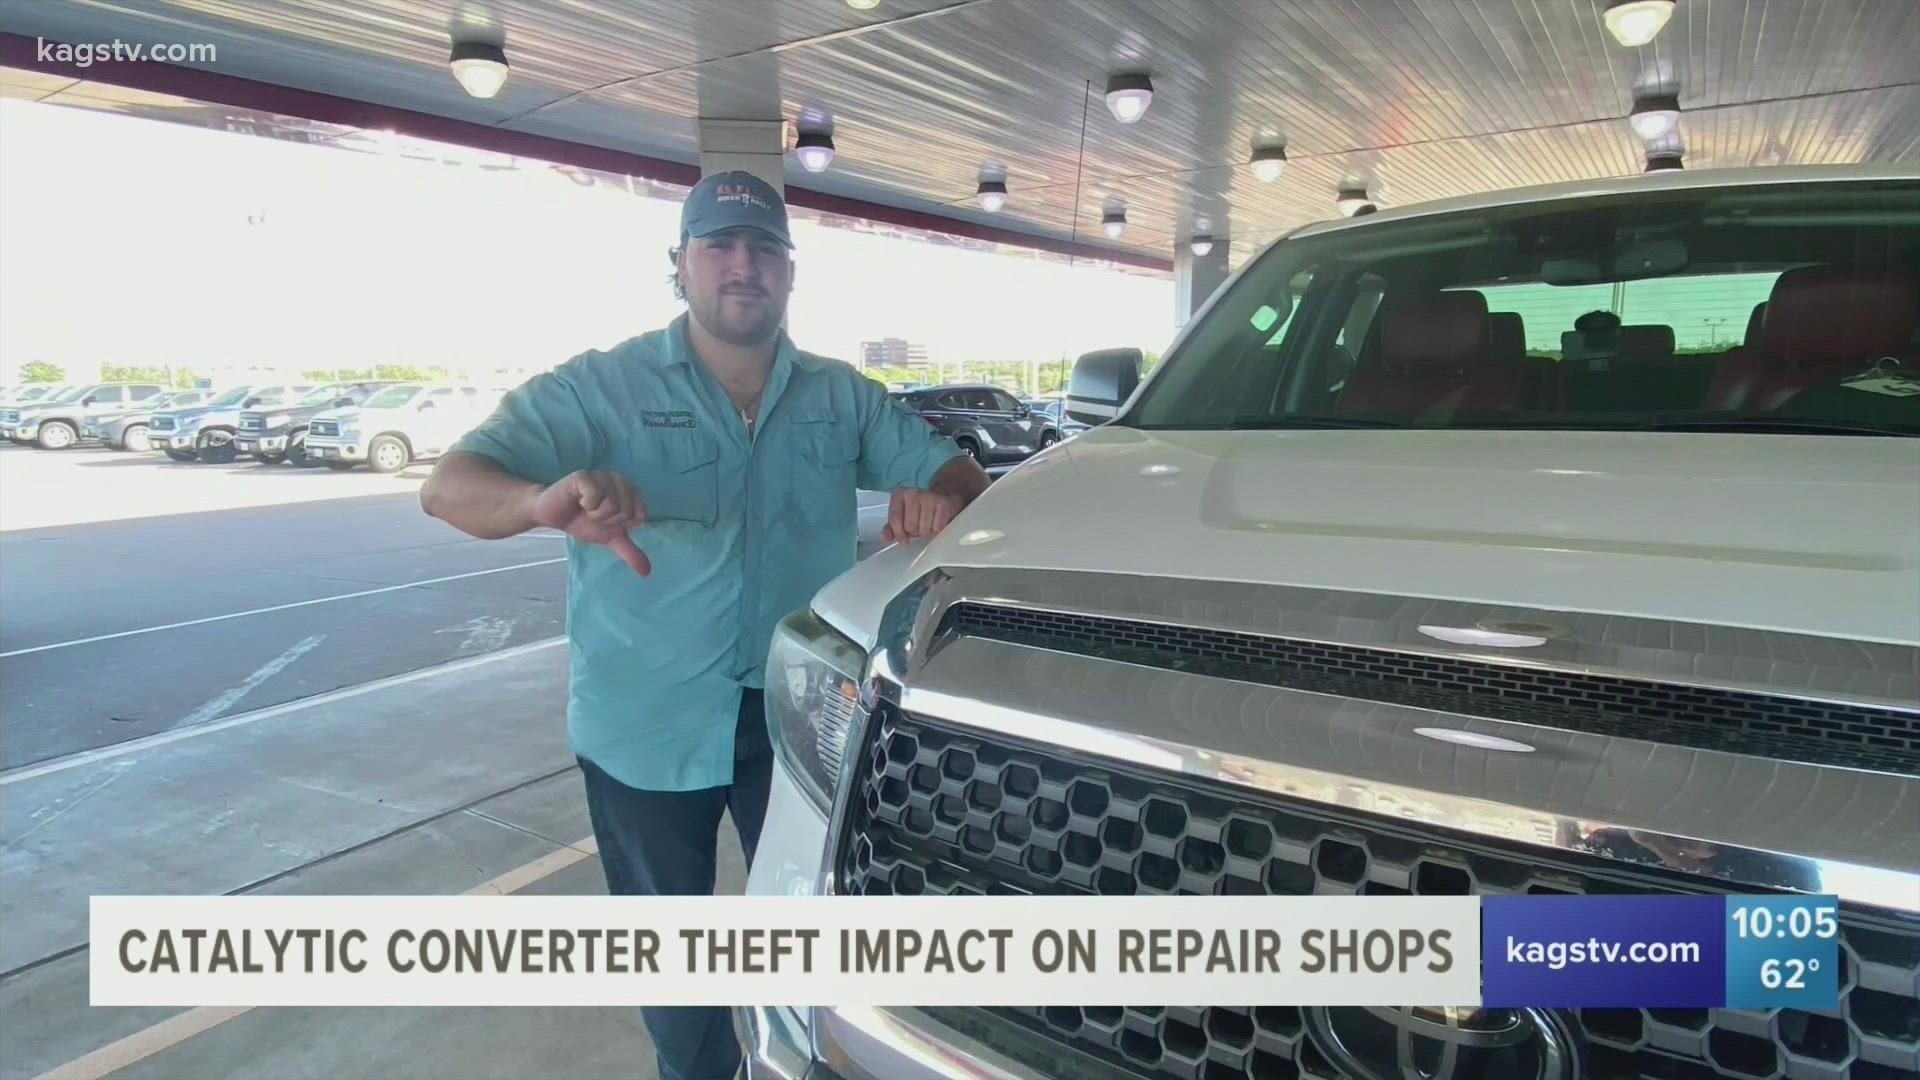 Not only are you losing money, auto repair shops are working overtime on helping get the cars back in order.